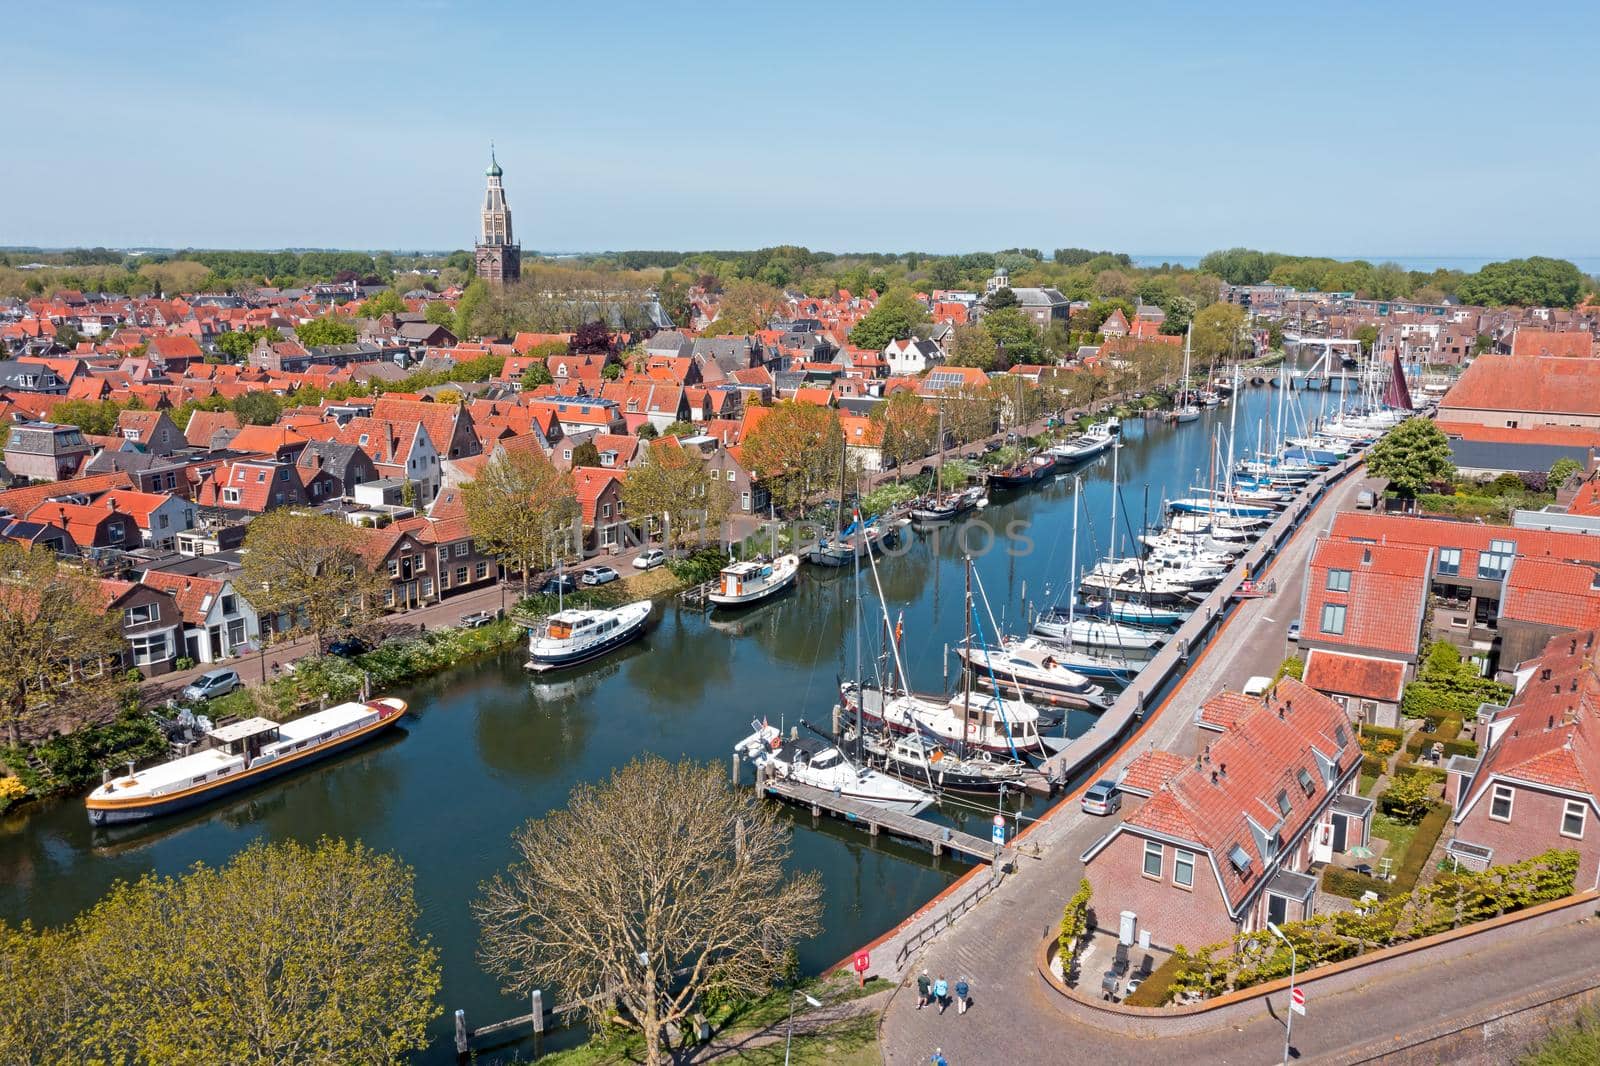 Aerial from the historical city Enkhuizen in the Netherlands by devy